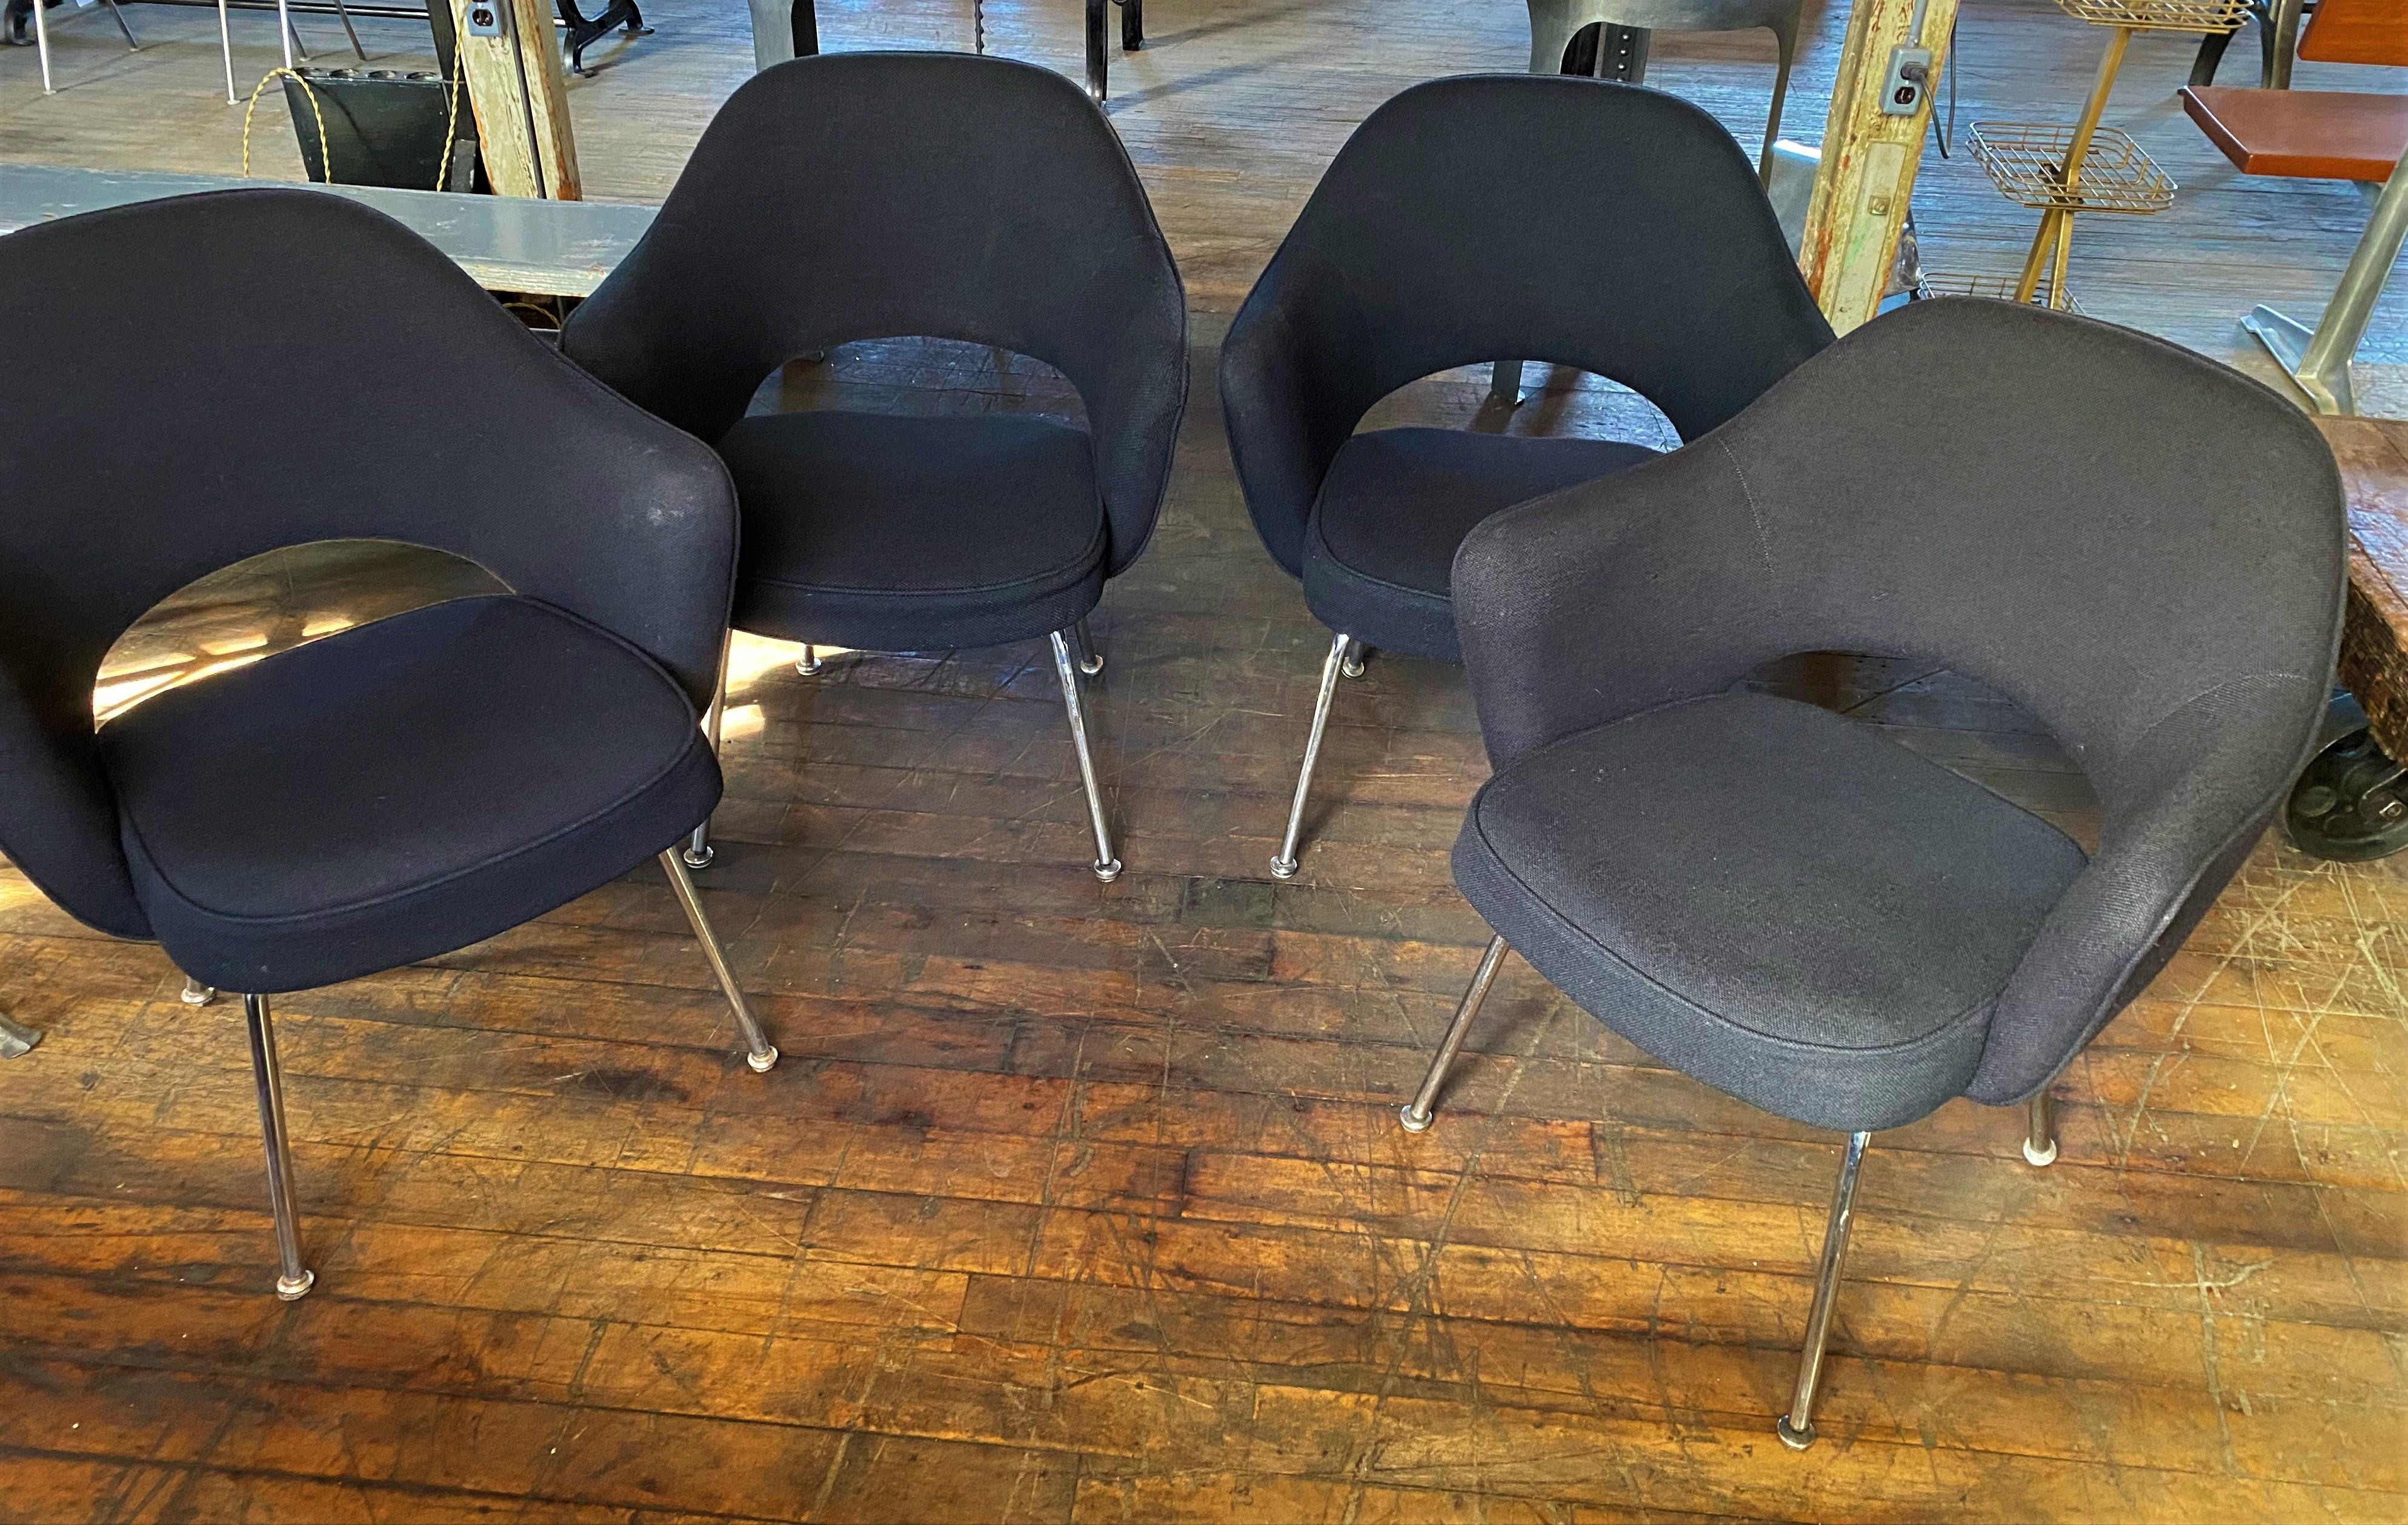 Set of 4 Saarinen executive chairs.
Overall dimensions: 23